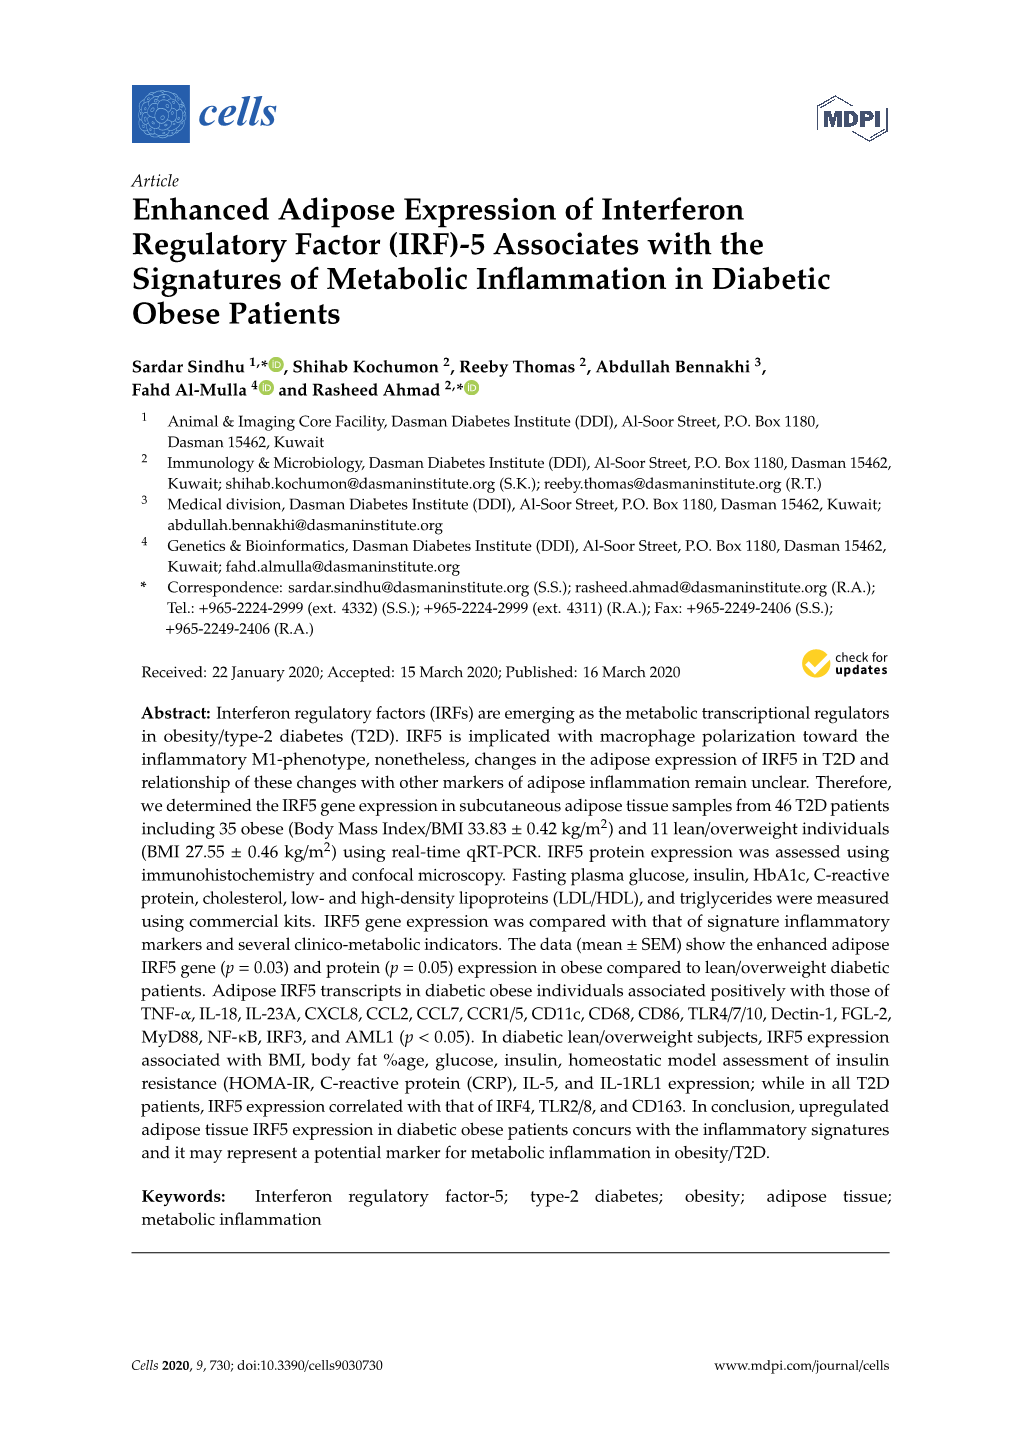 Enhanced Adipose Expression of Interferon Regulatory Factor (IRF)-5 Associates with the Signatures of Metabolic Inﬂammation in Diabetic Obese Patients